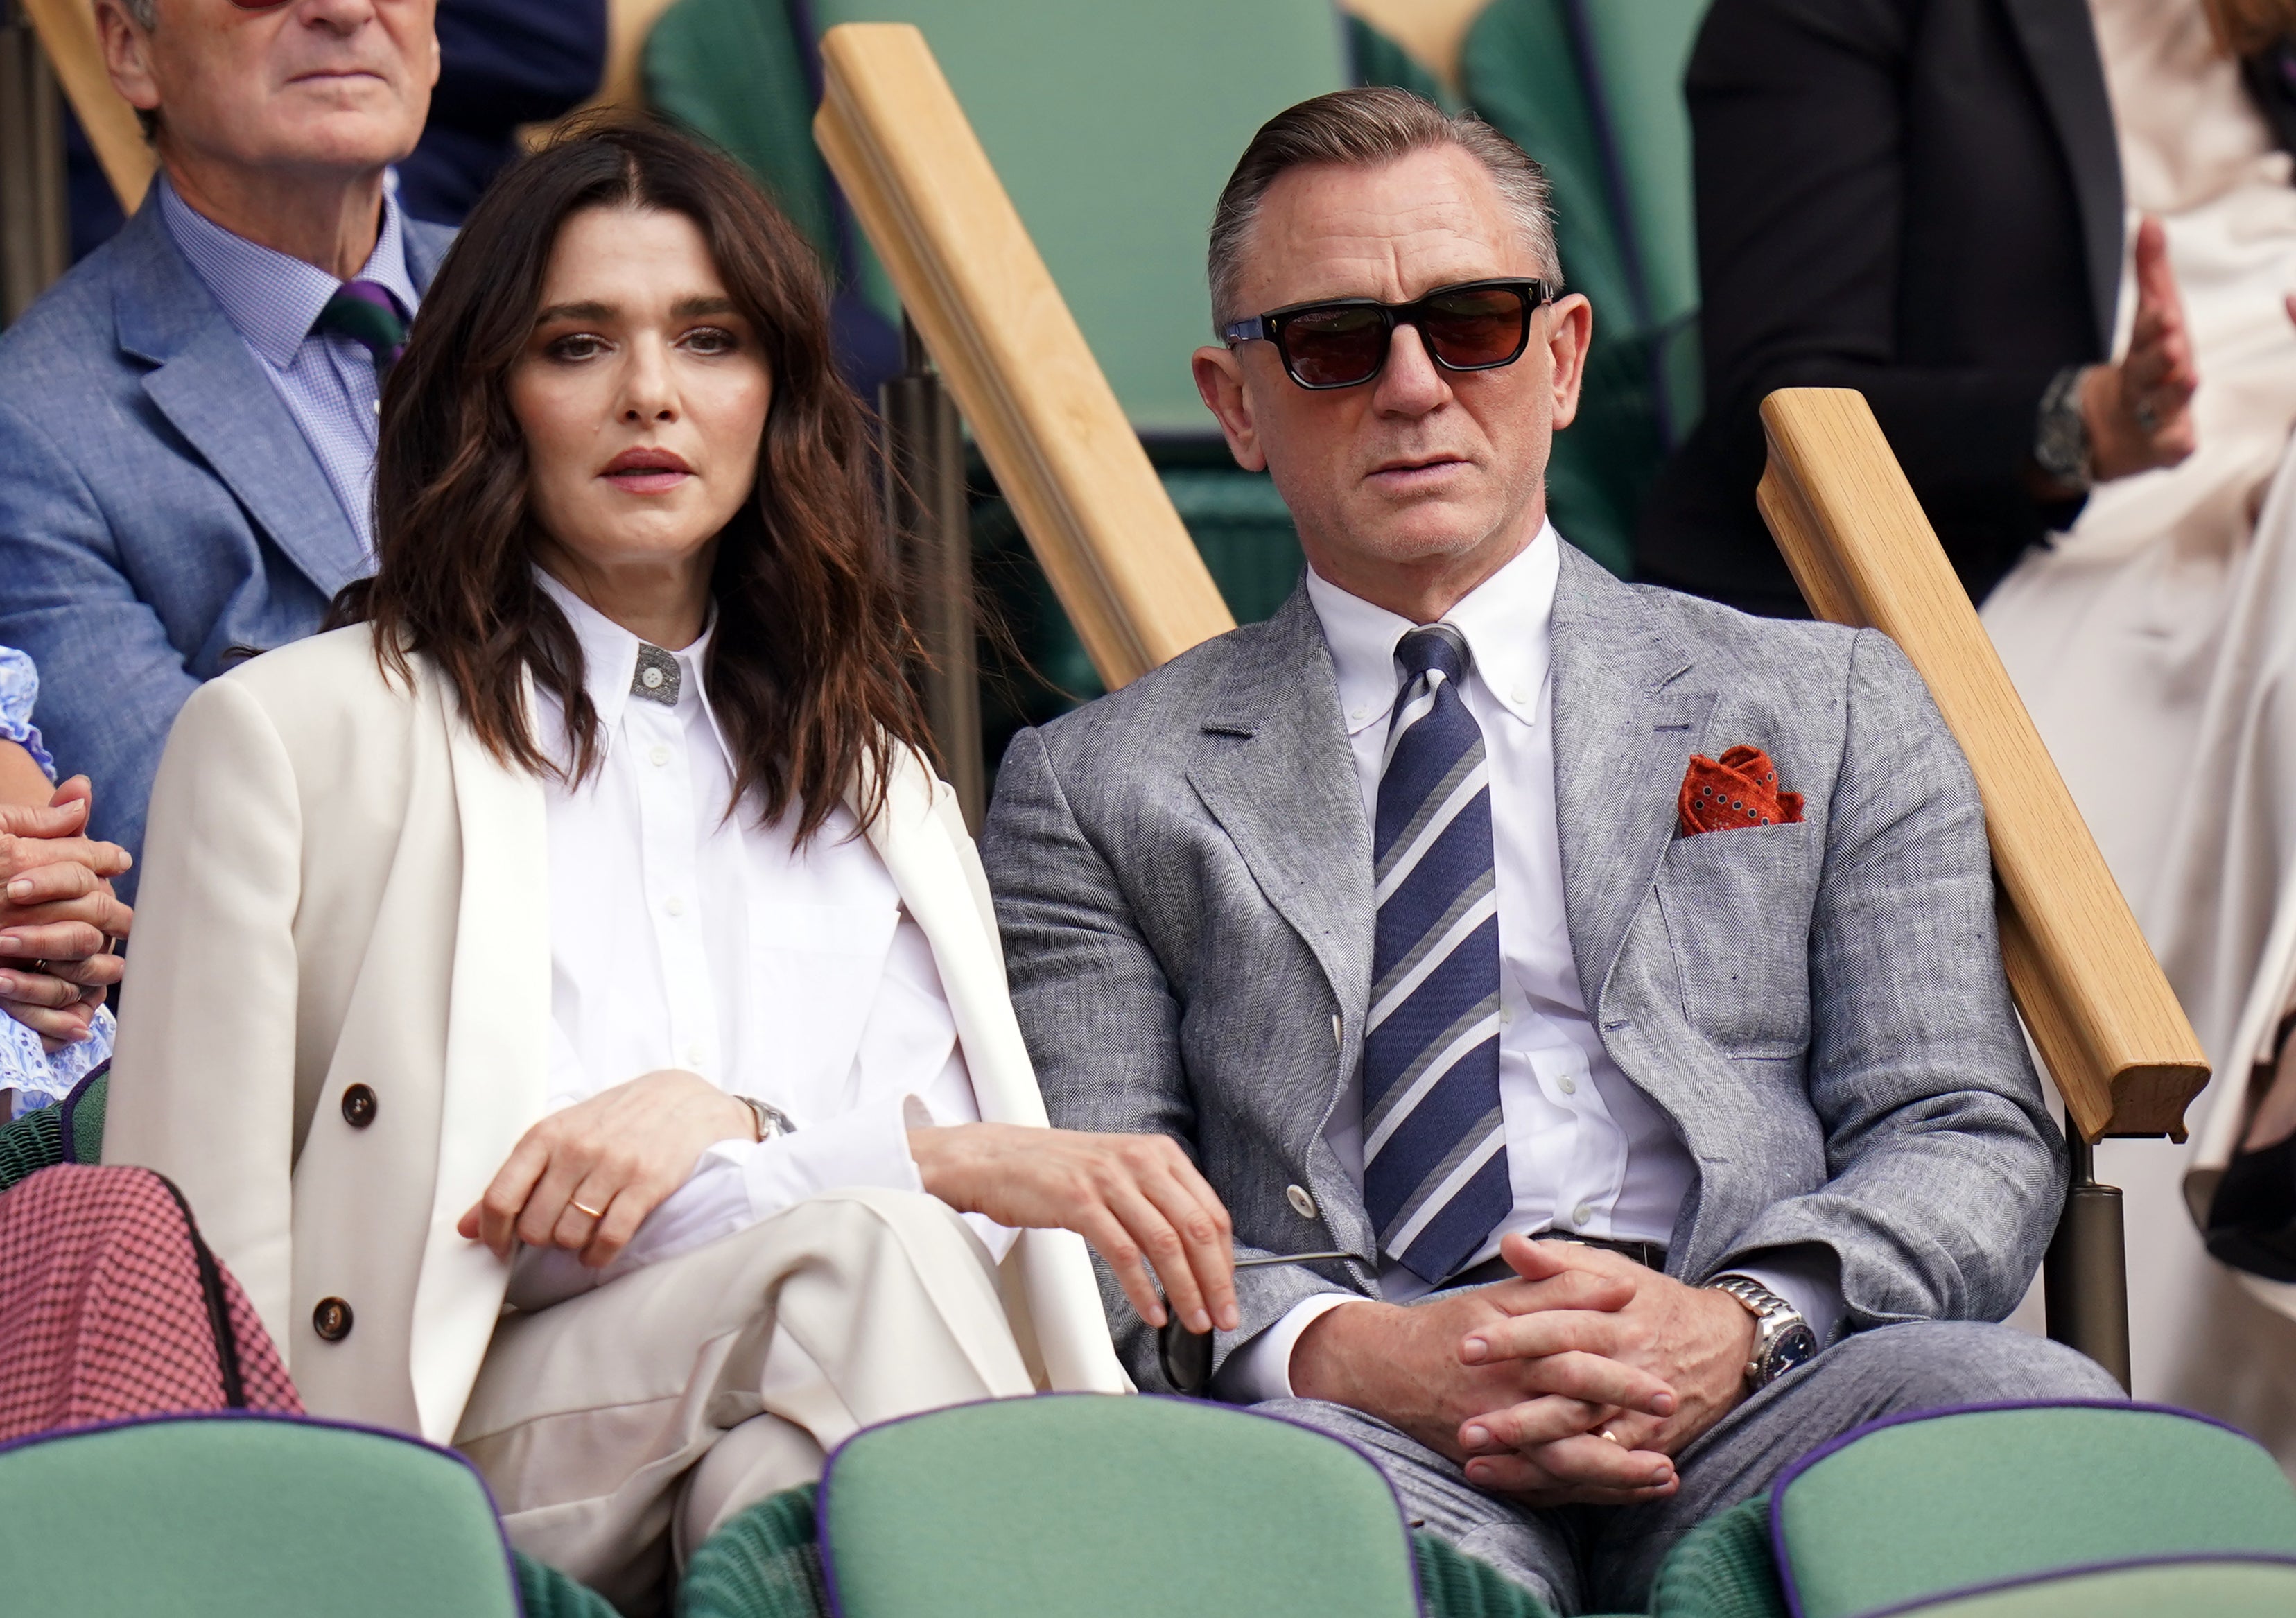 Rachel Weisz wore a classic cream suit with a sharp white shirt at last years’ tournament (Adam Davy/PA)